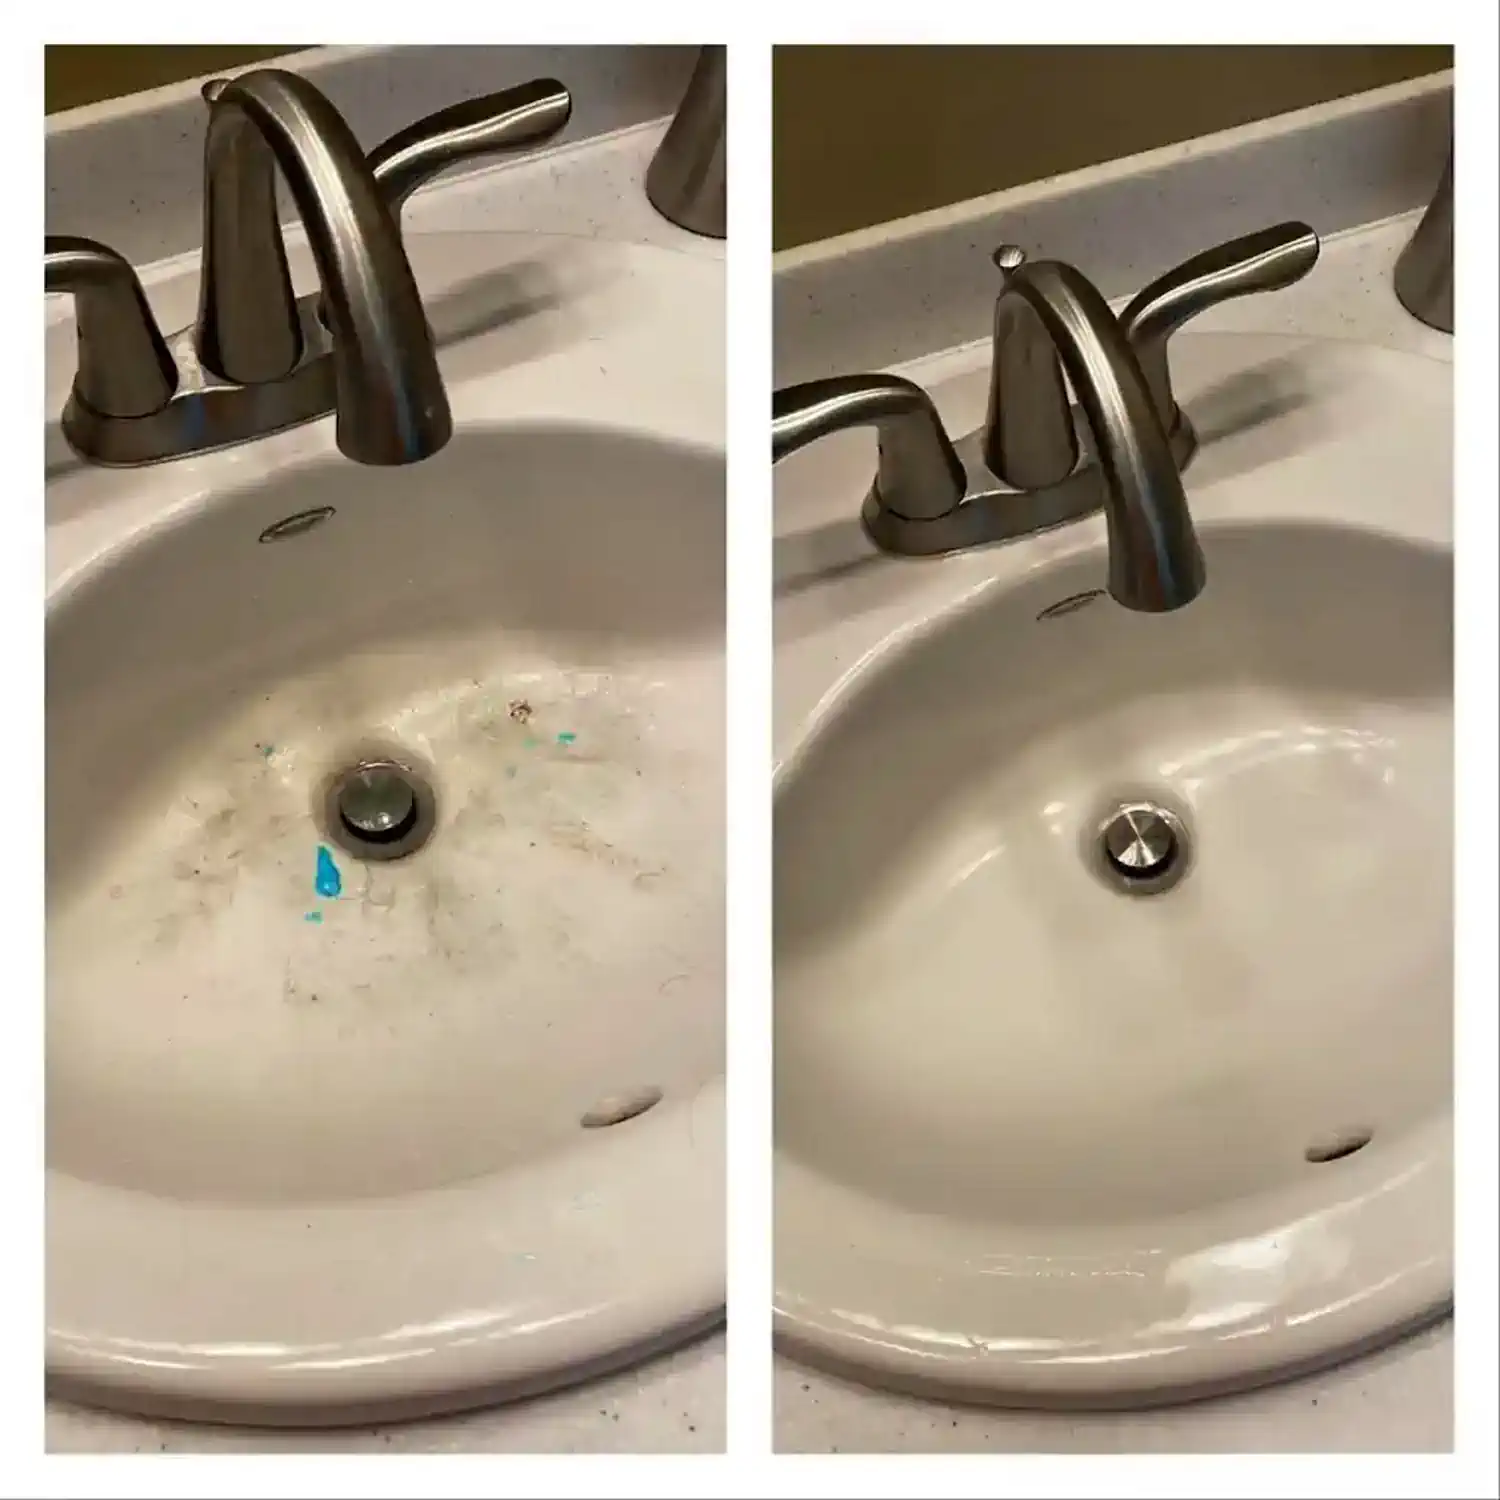 Clean Bathroom Sink - Before and After